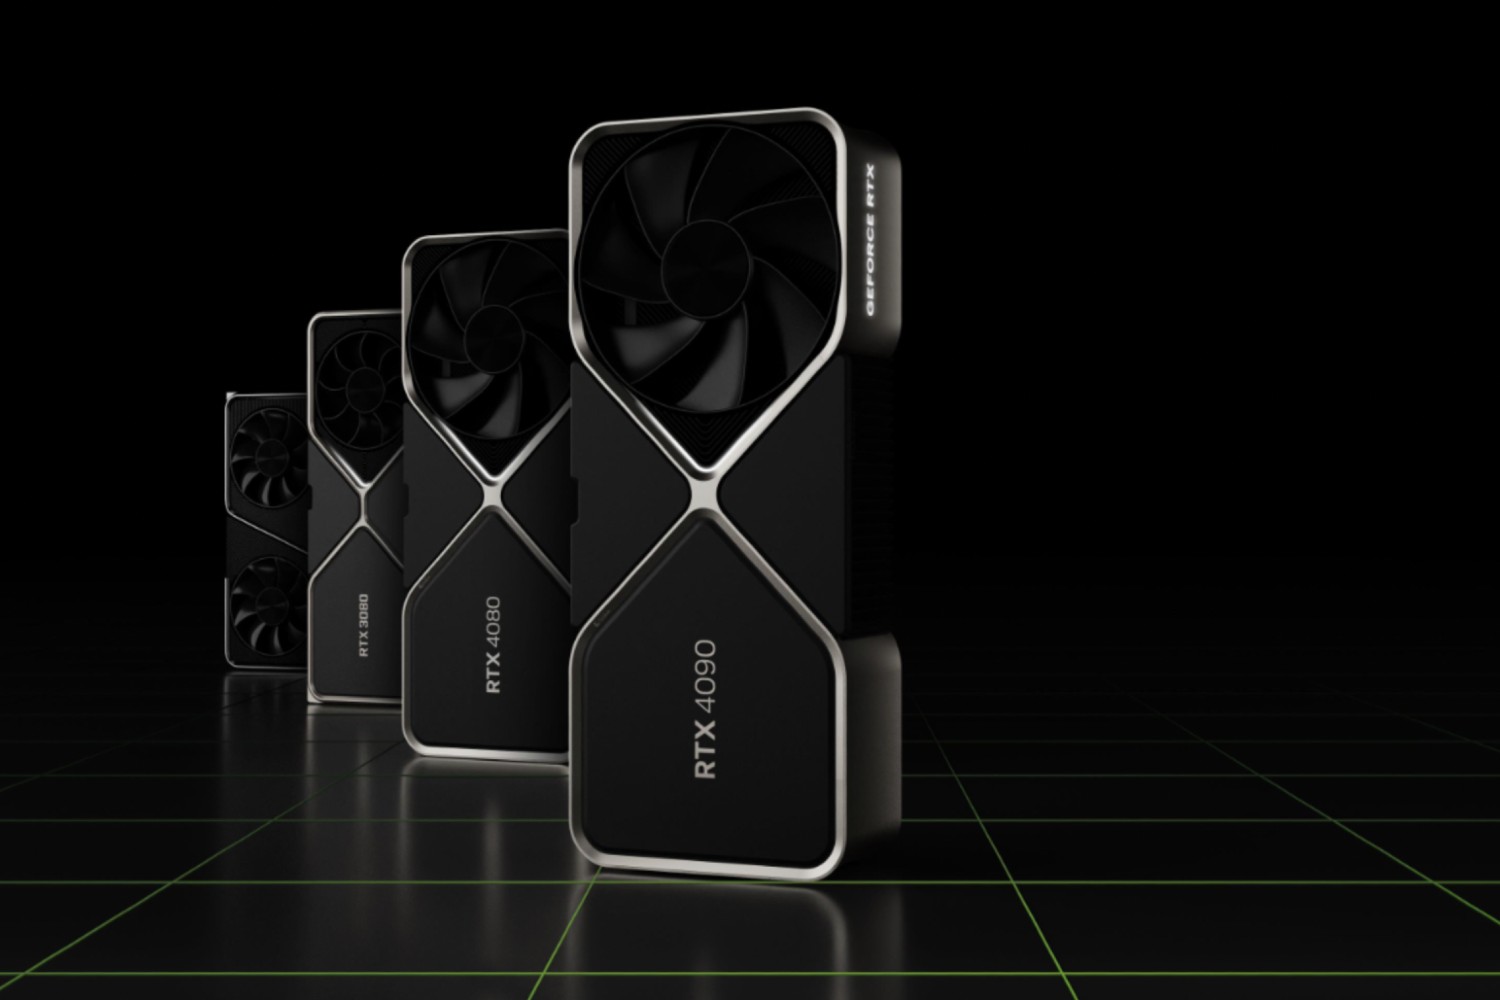 NVIDIA GeForce RTX 4090 4080 Graphics Cards Release Date